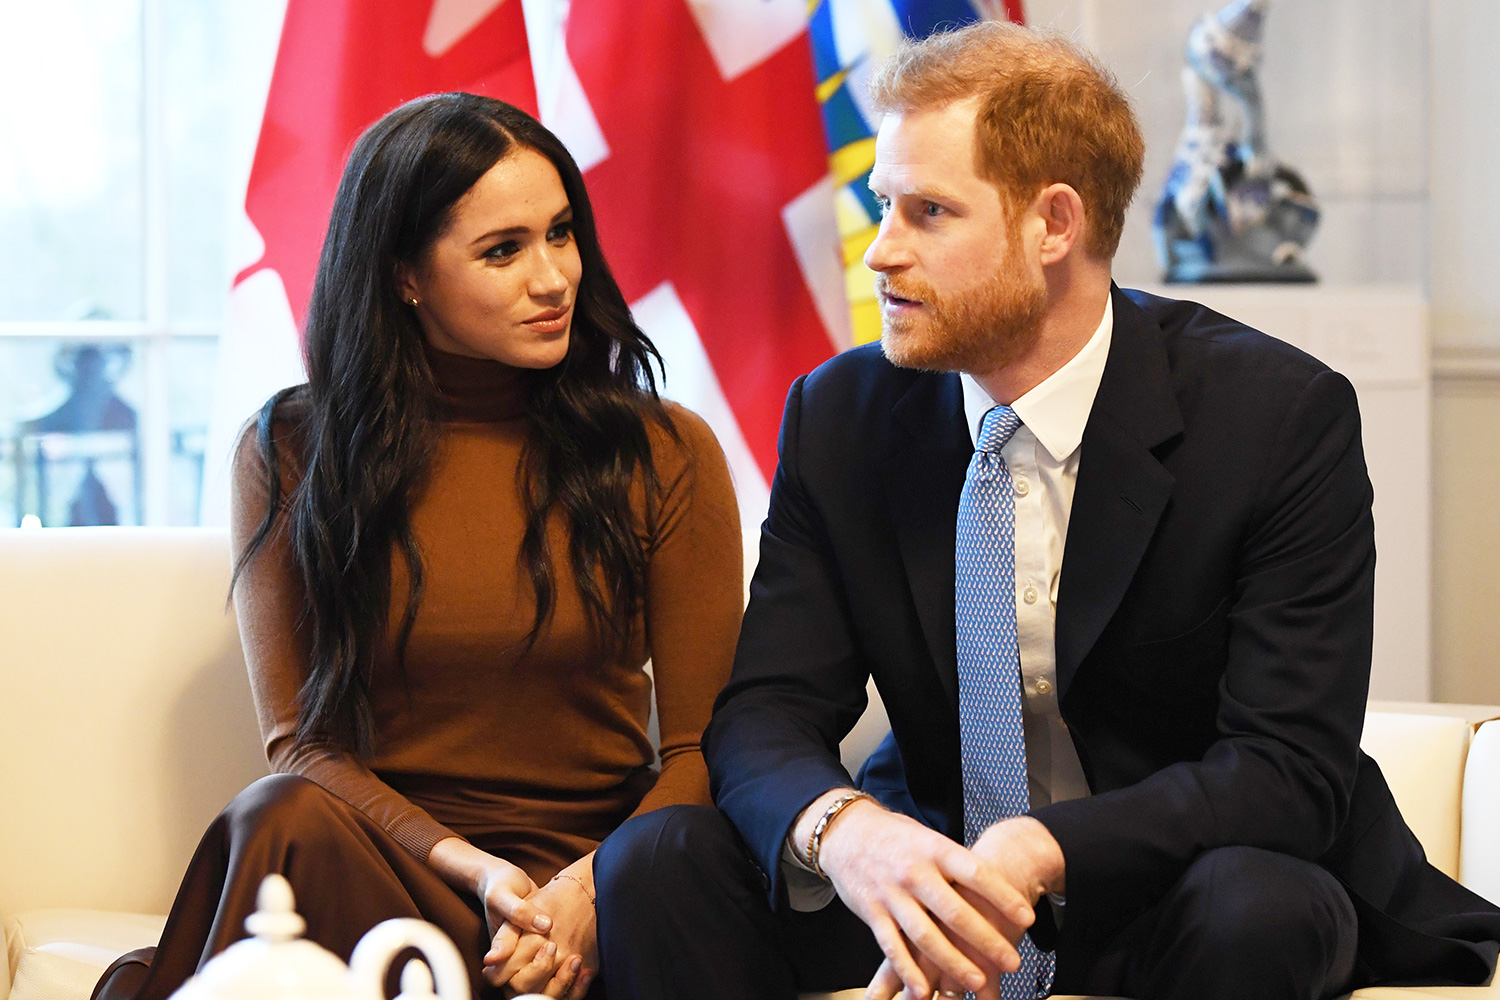 Harry, Meghan will no longer use HRH tittle – Palace